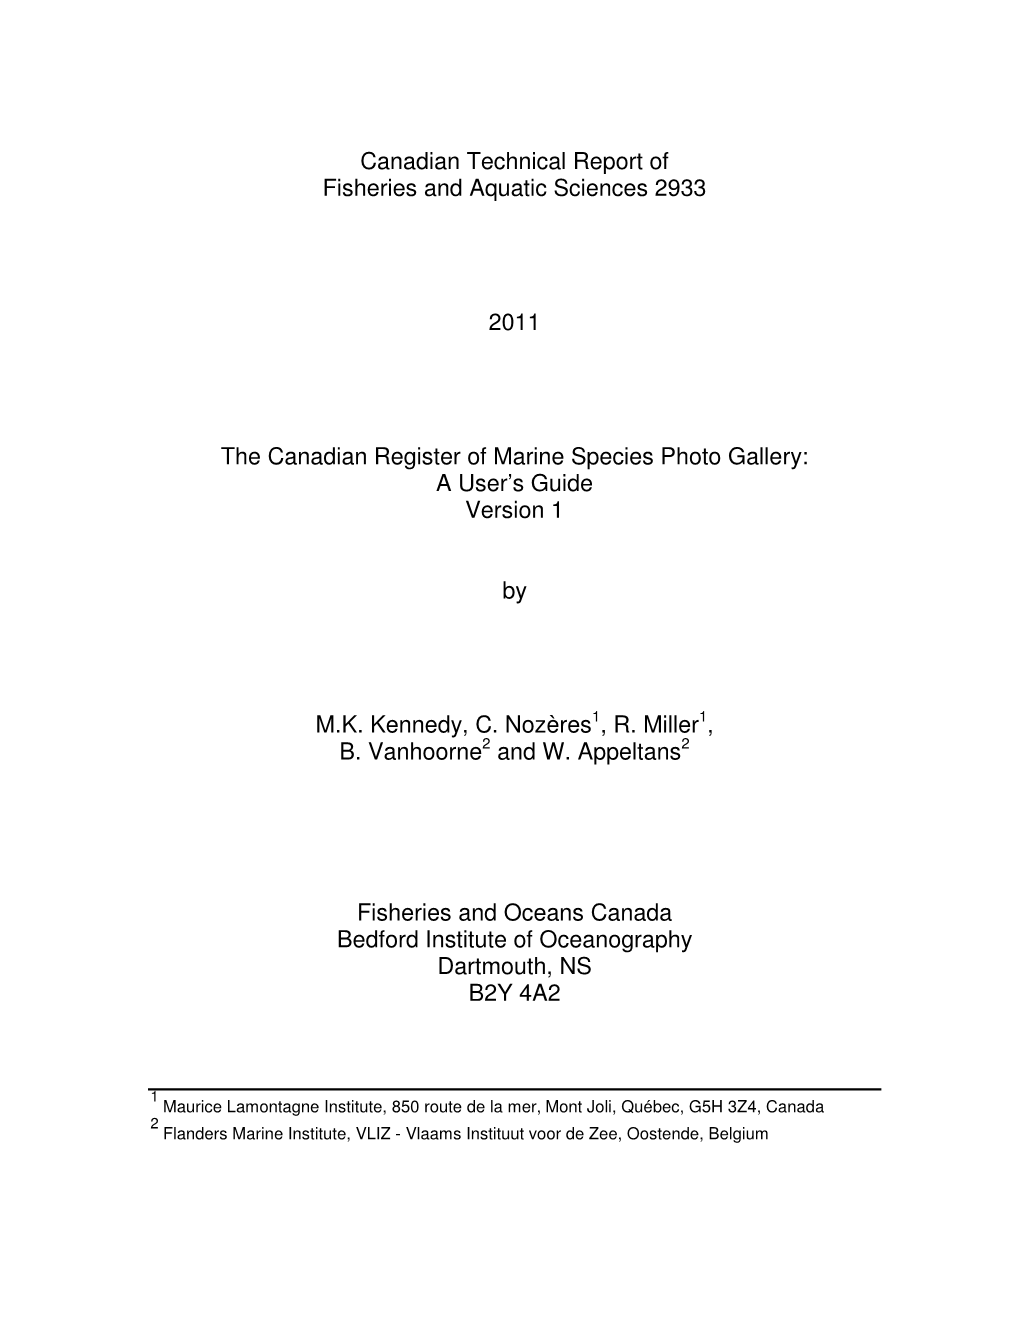 Canadian Technical Report of Fisheries and Aquatic Sciences 2933 2011 the Canadian Register of Marine Species Photo Gallery